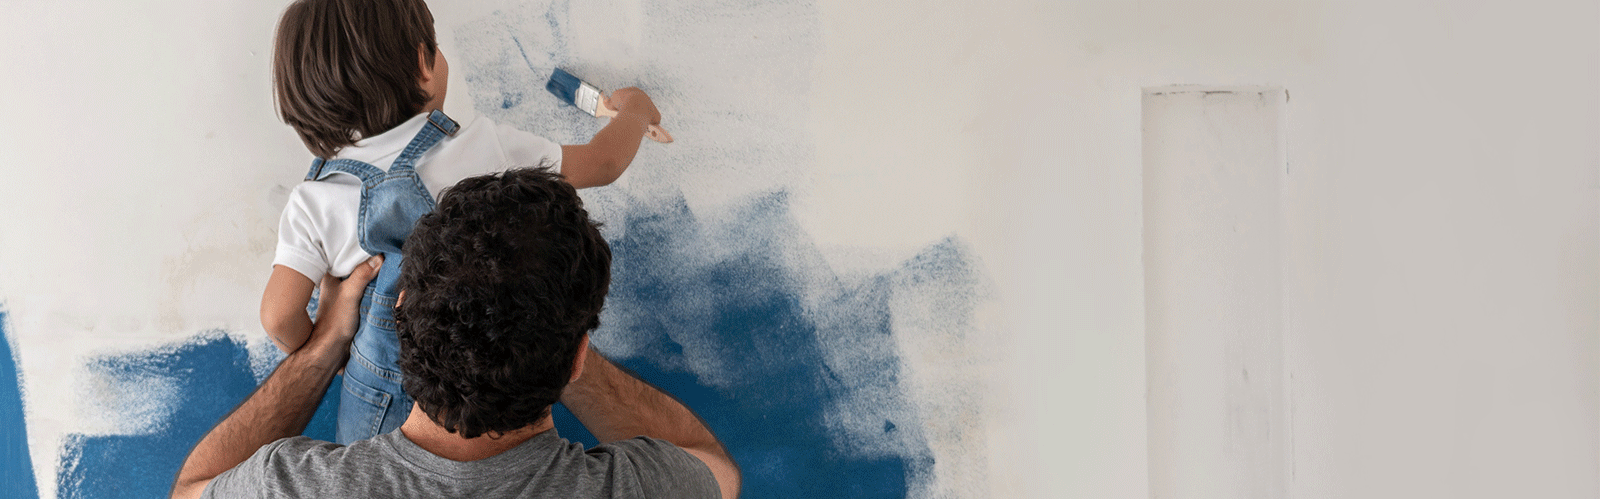 Dad and Child painting wall